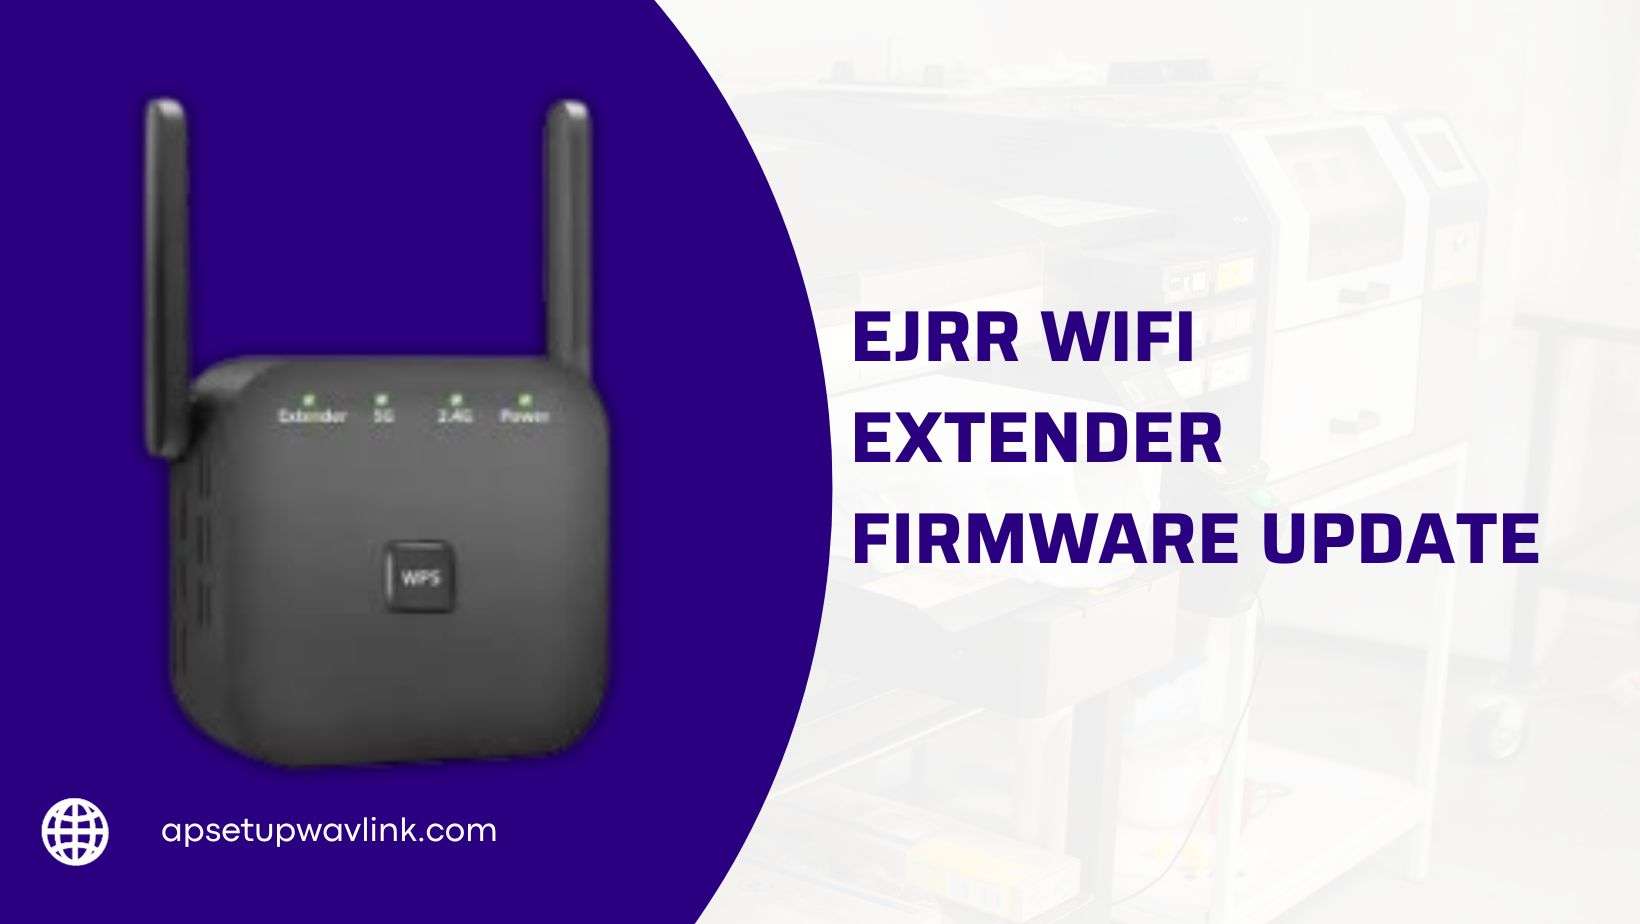 You are currently viewing EJRR WiFi Extender Firmware Update